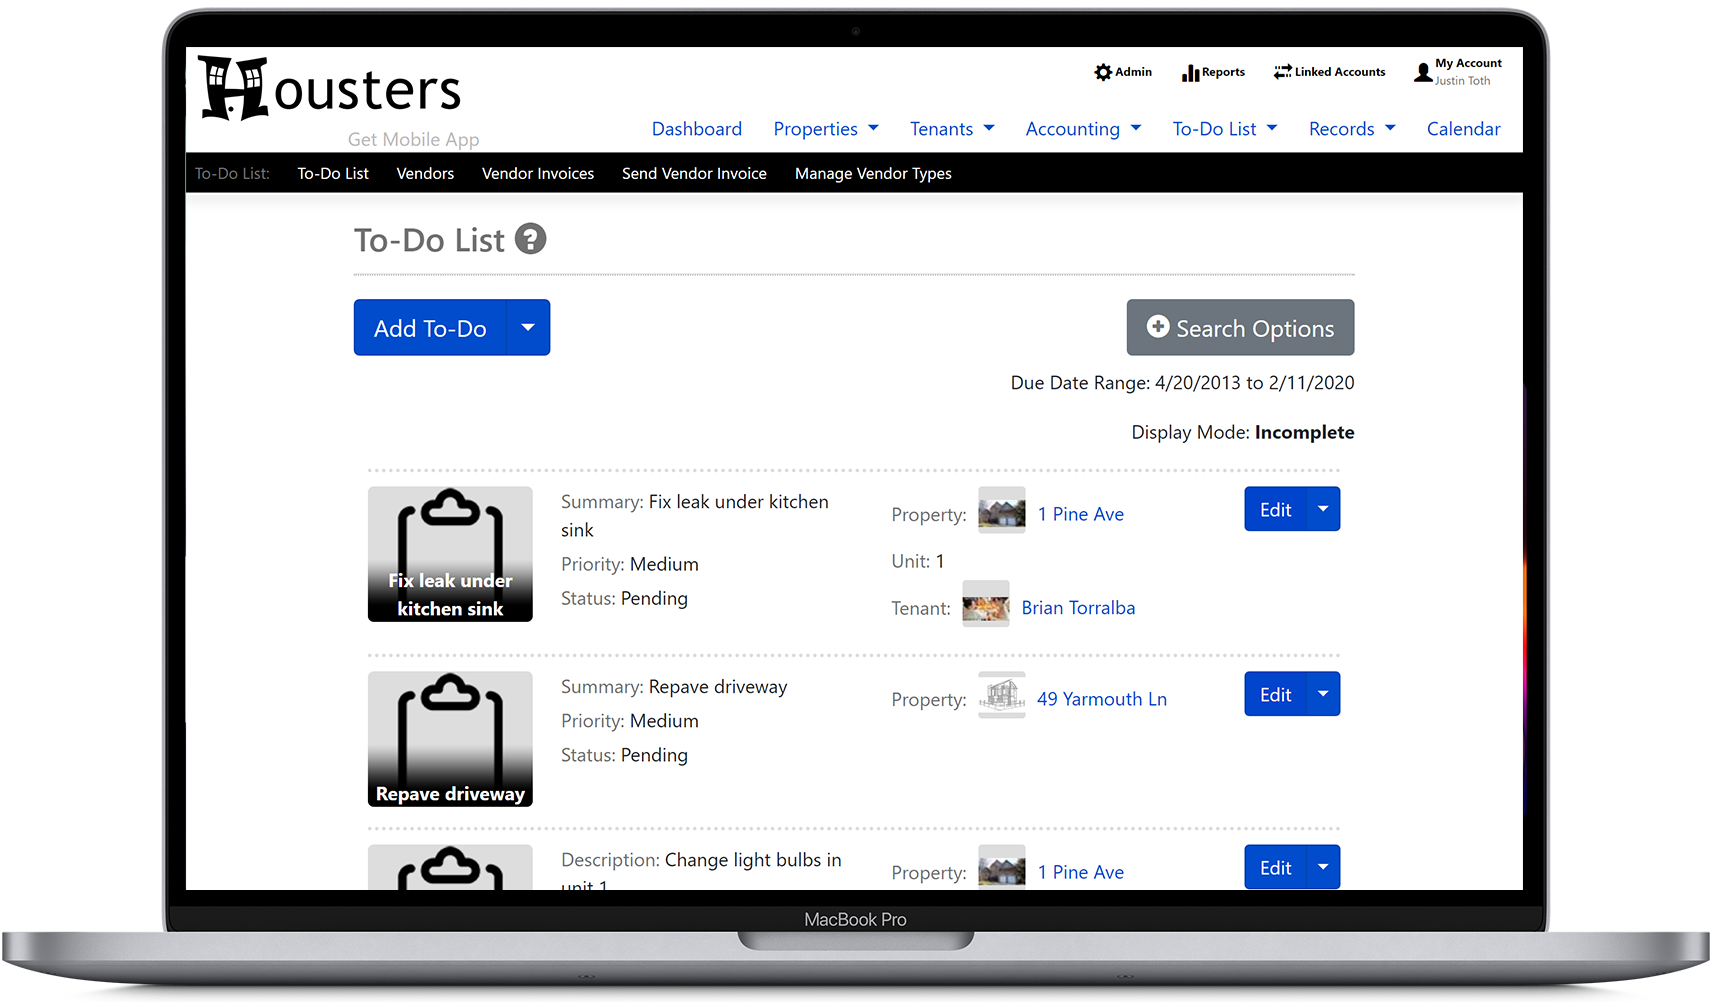 View a list of to-do list tasks on the Housters property manager software